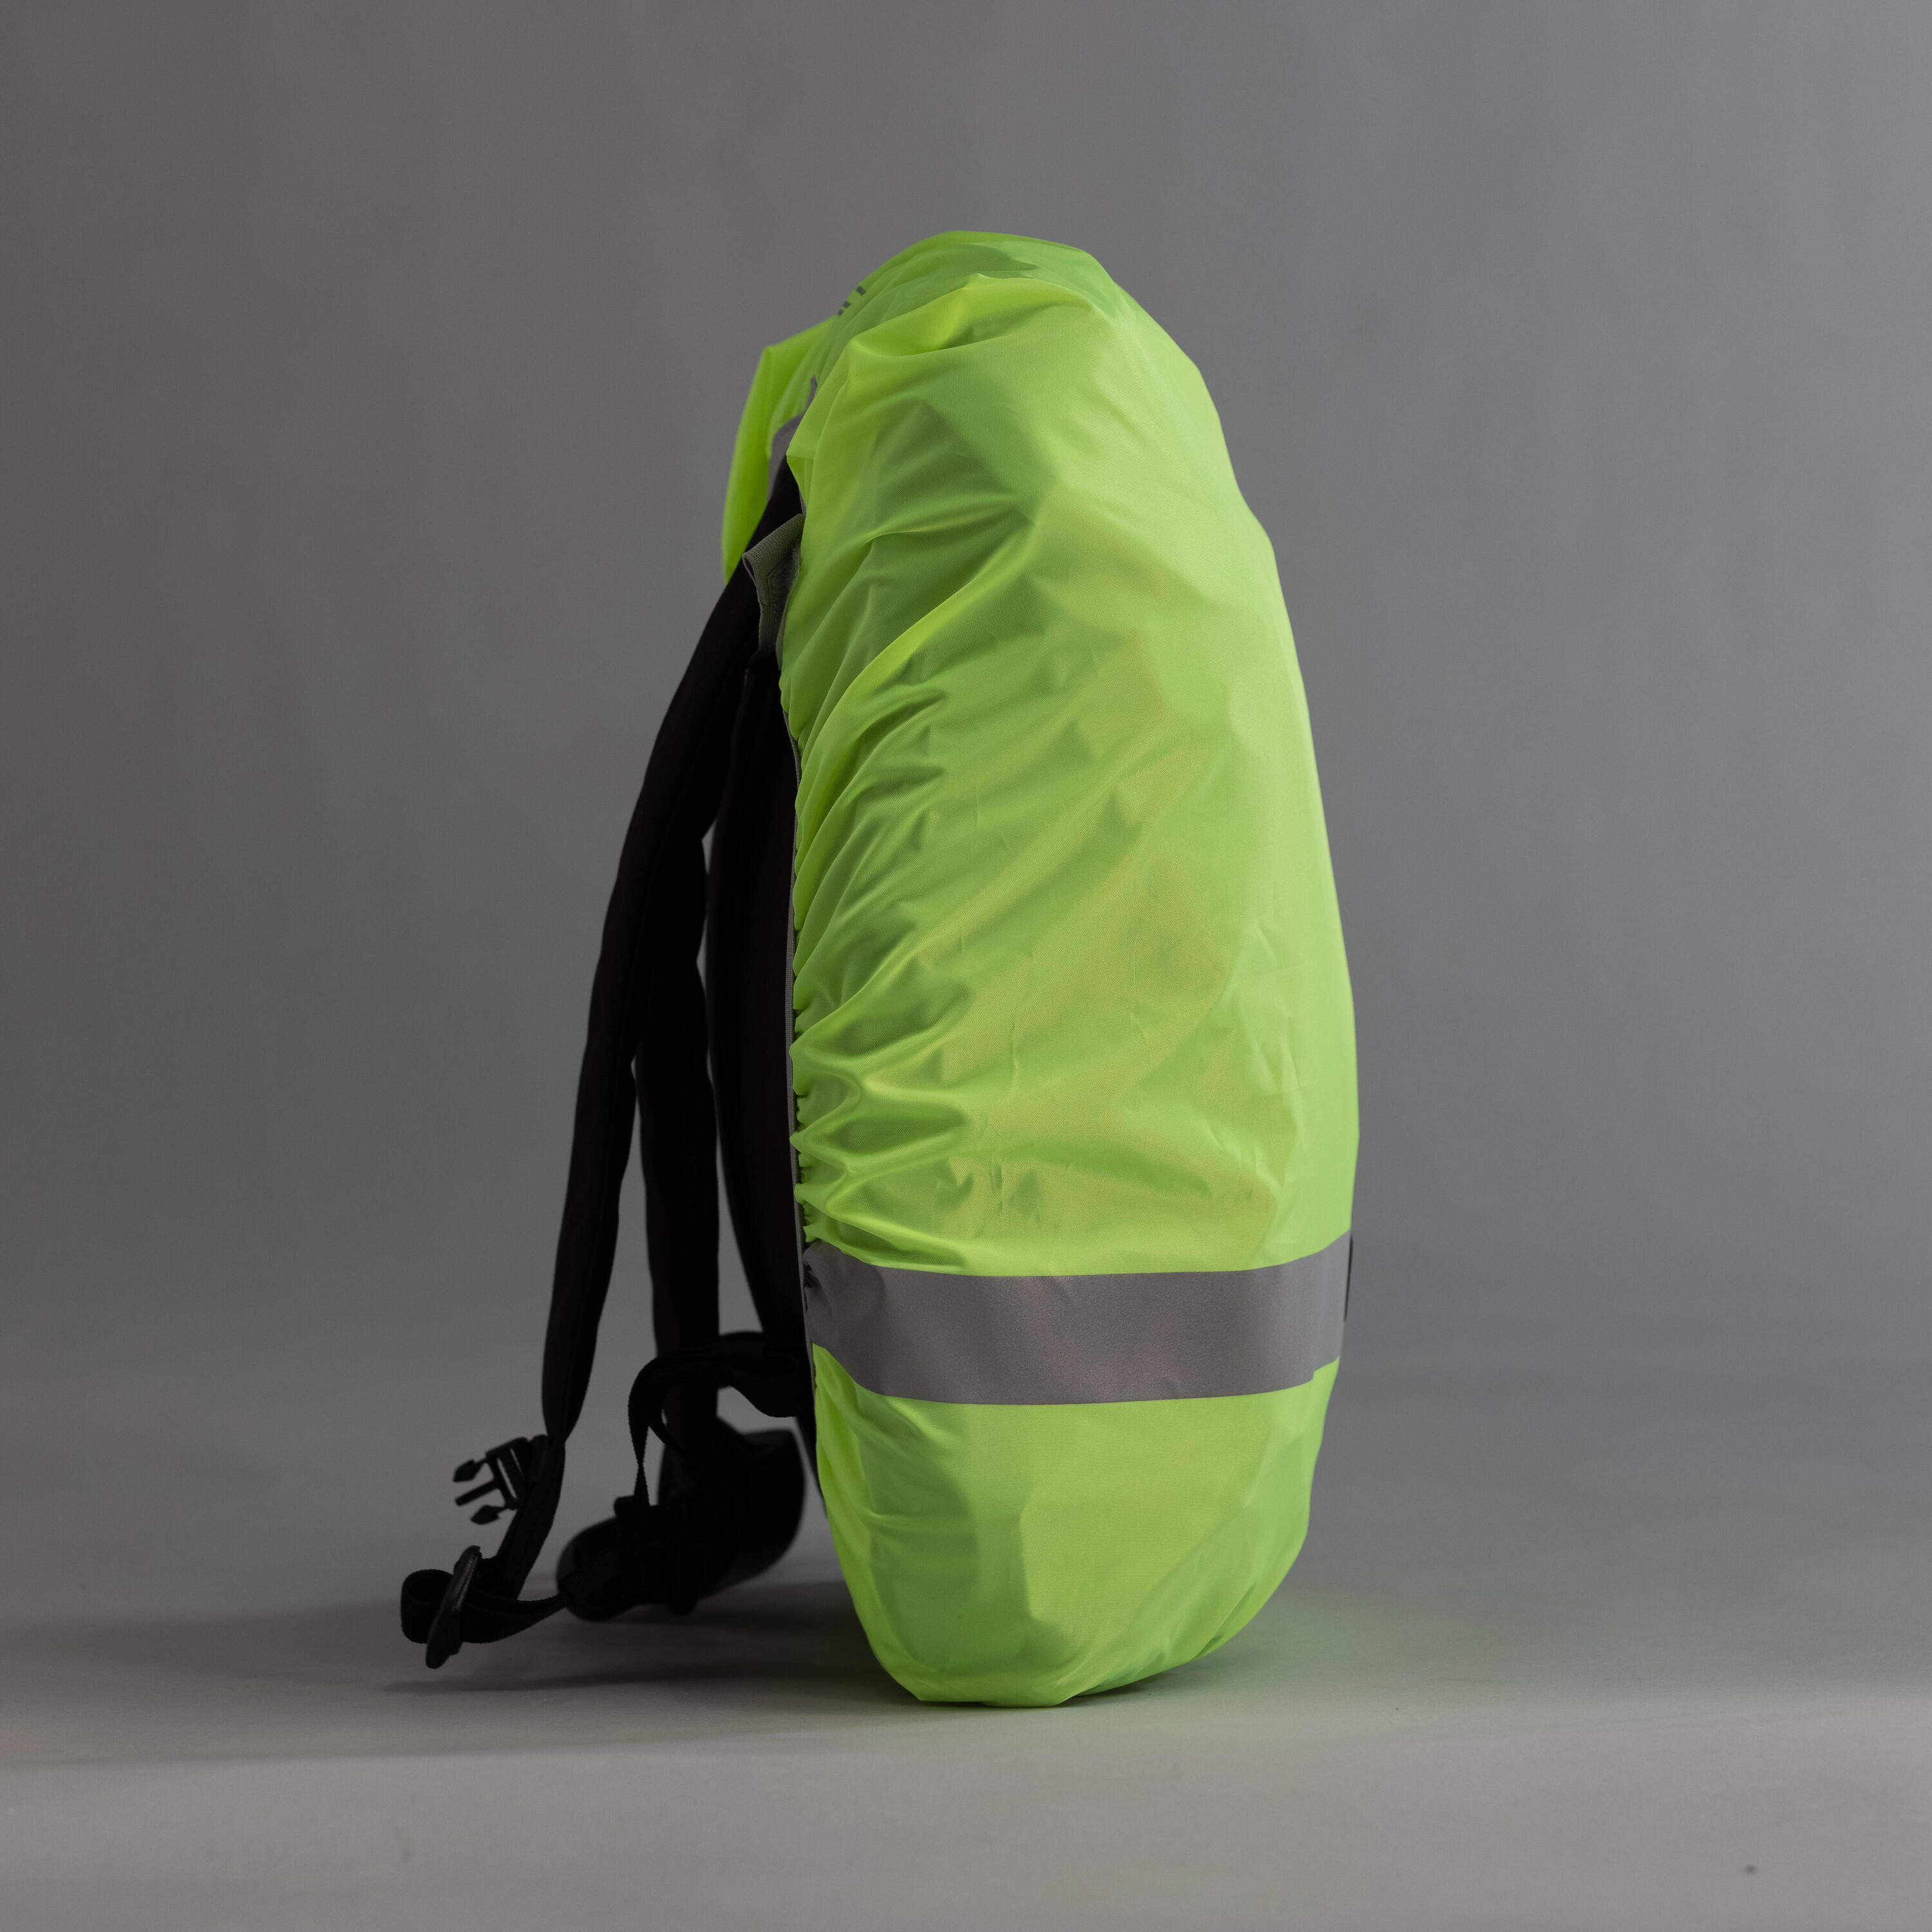 Waterproof Day/Night Visibility Bag Cover - Neon Yellow 3/7